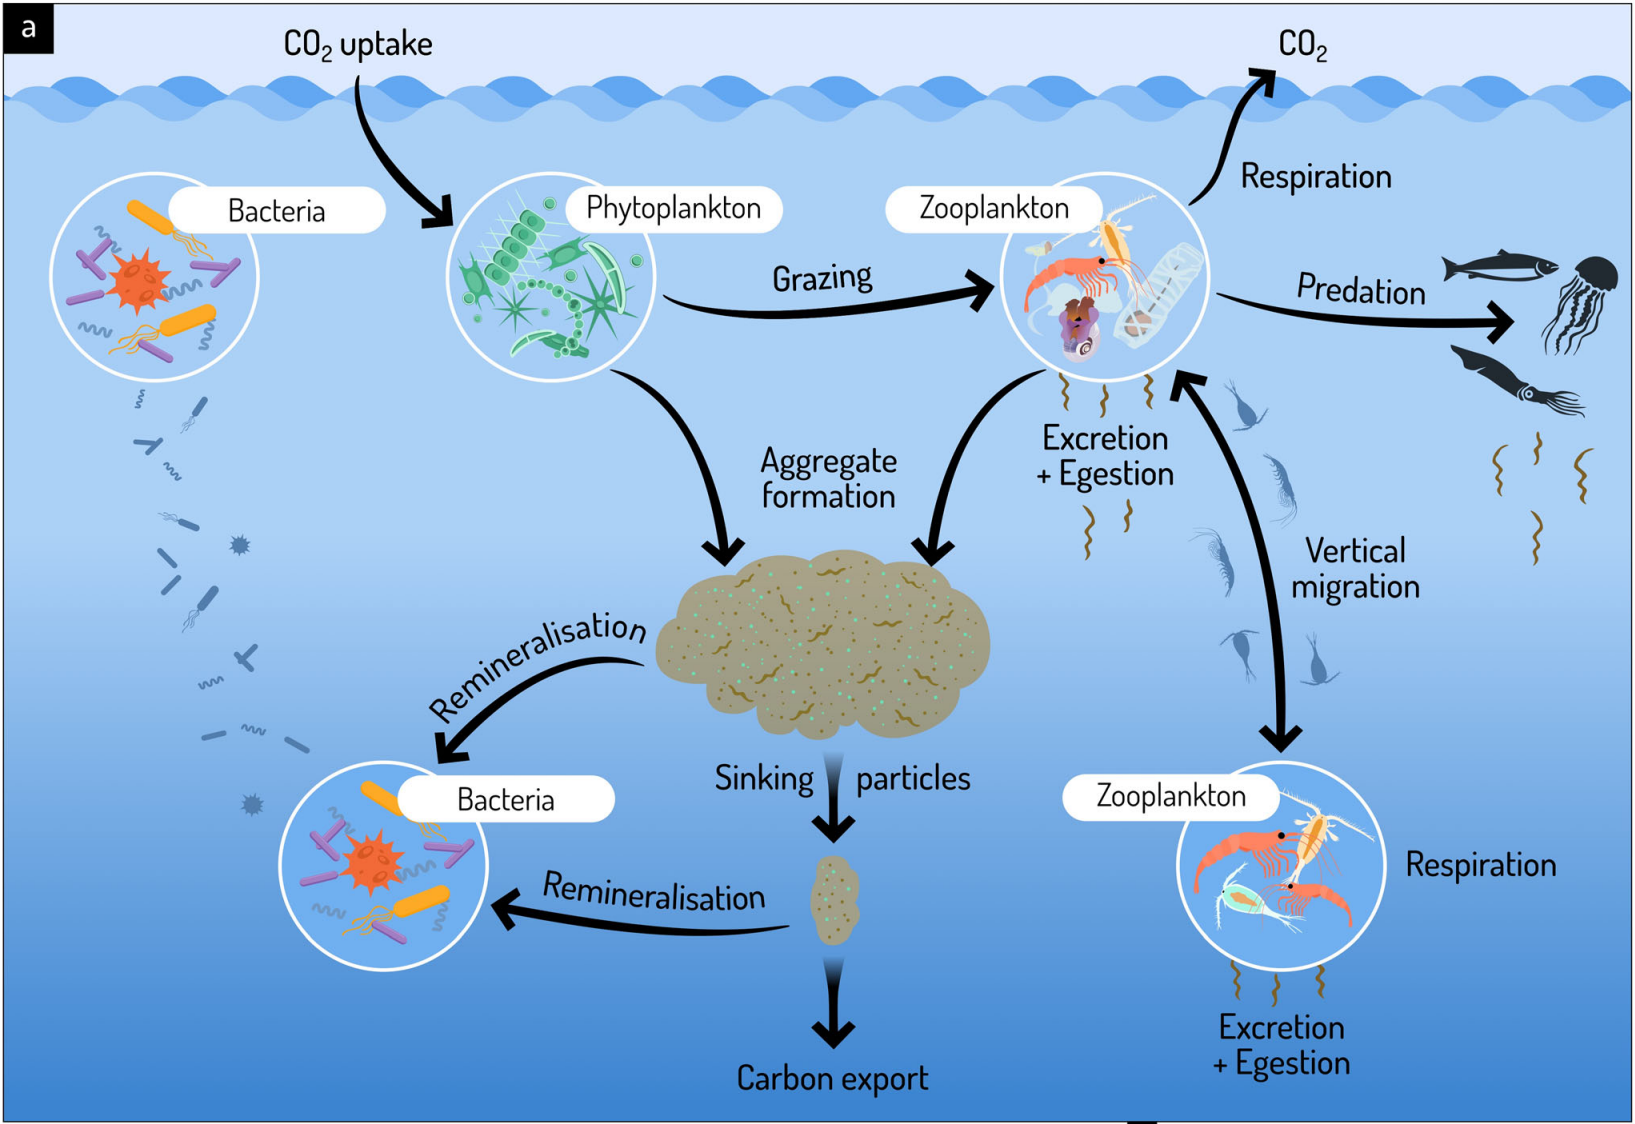 The role of zooplankton within the biological carbon pump